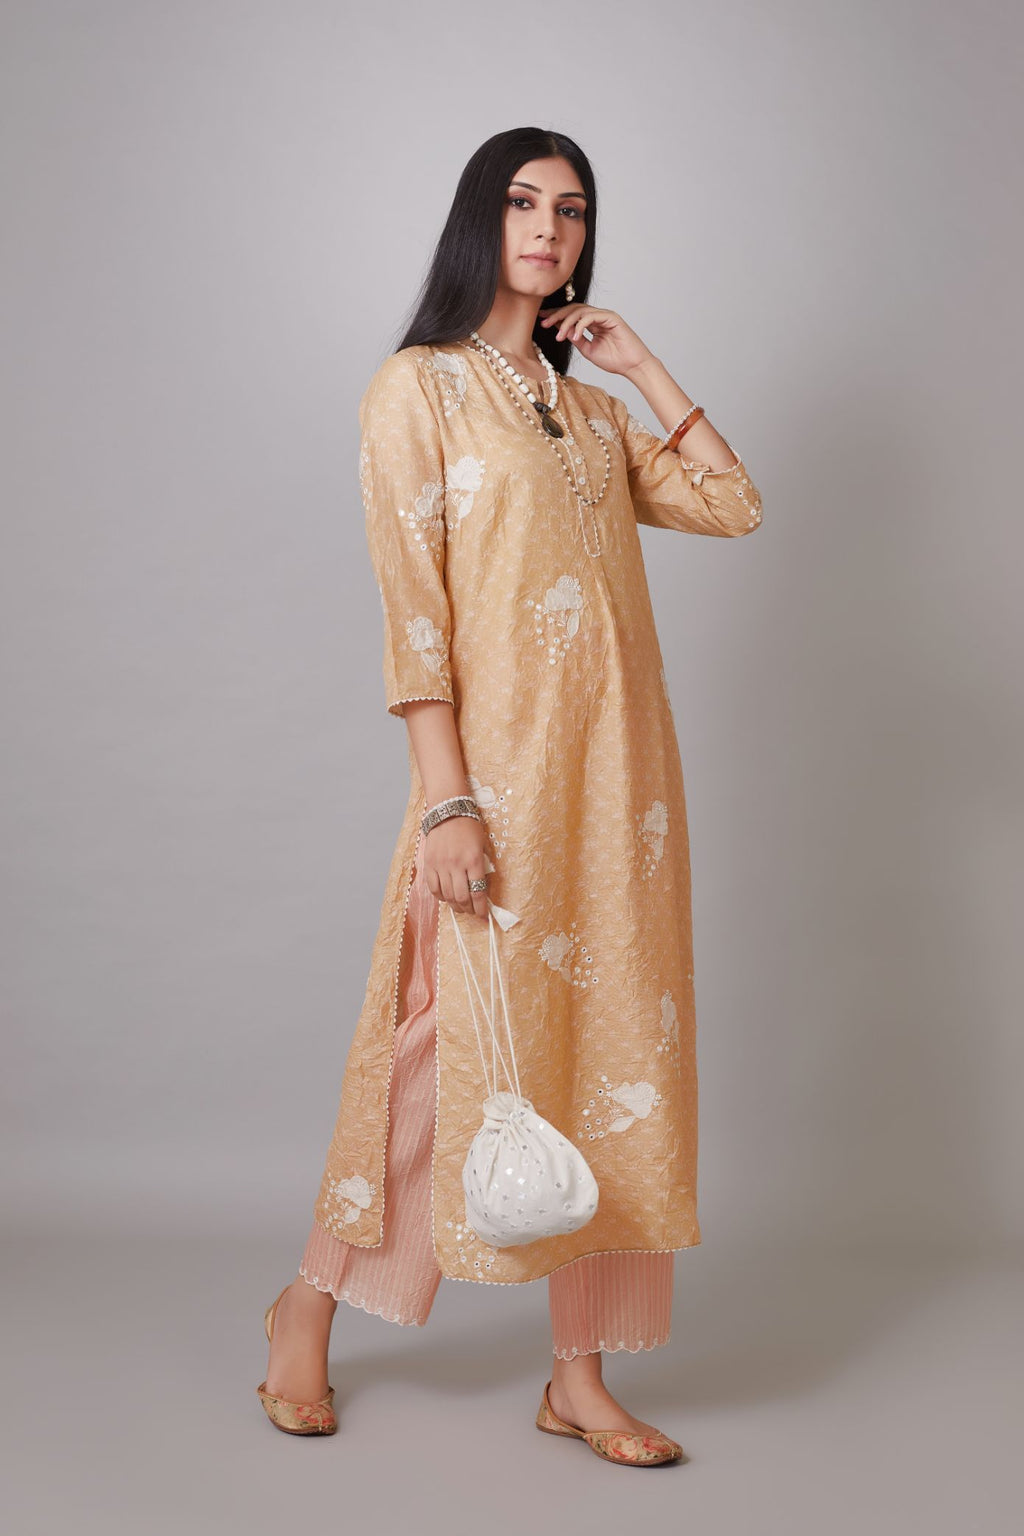 Peach hand block printed crushed silk kurta set with applique flower embroidery and lace detailing at neck and side slits.